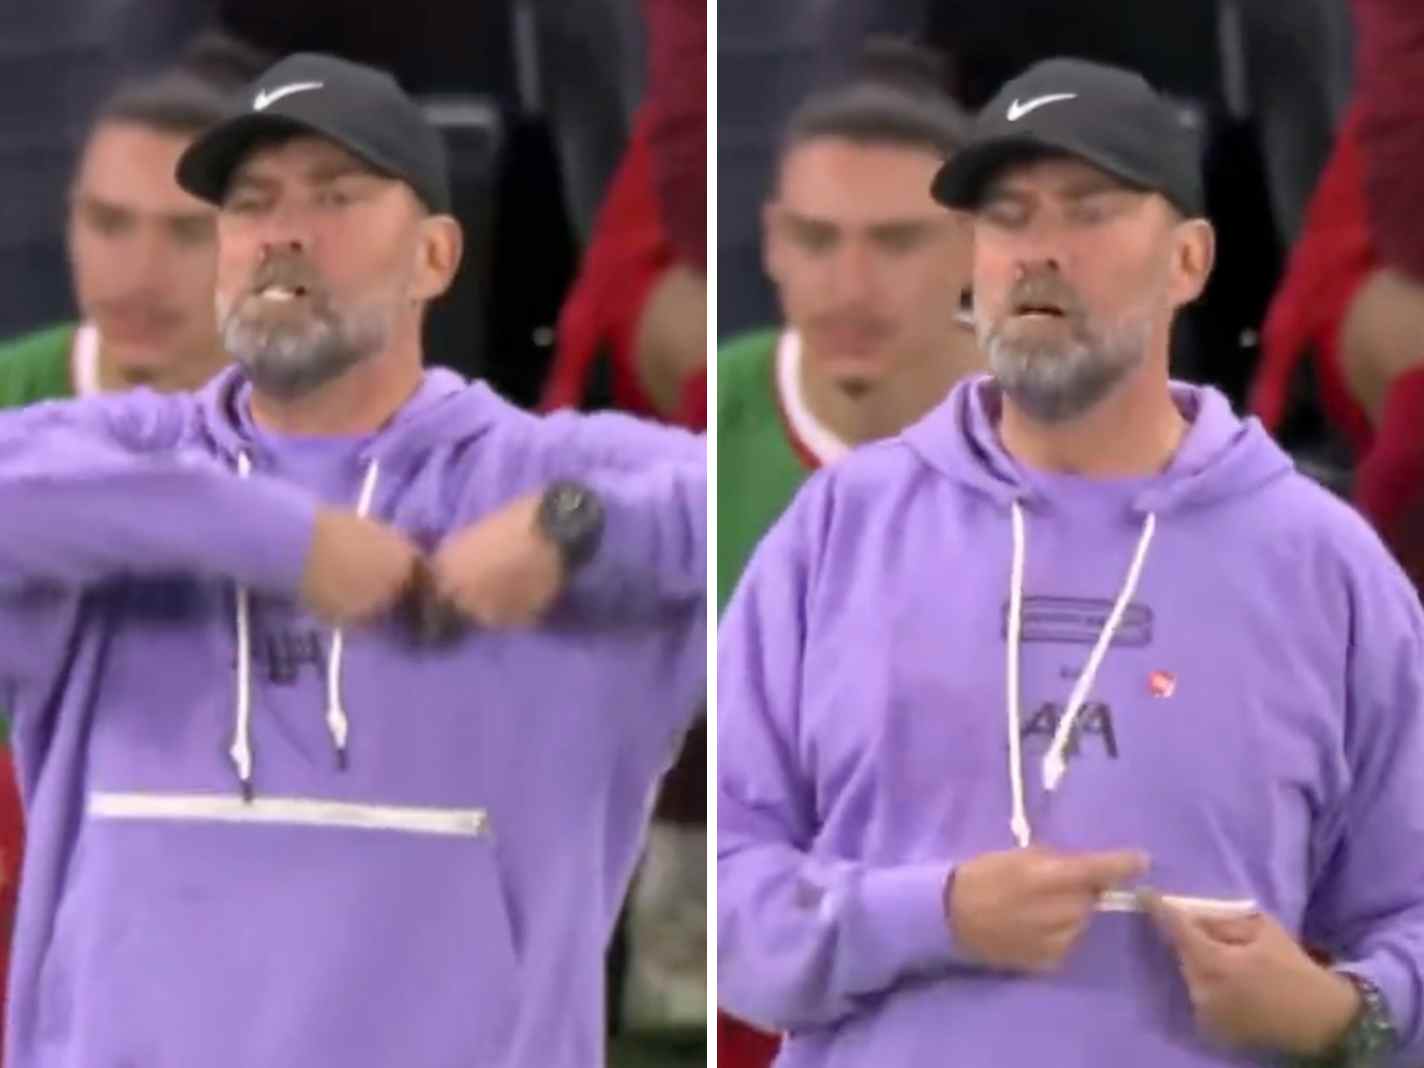 Here’s Who Jurgen Klopp Made the Heart Sign For During Spurs Defeat